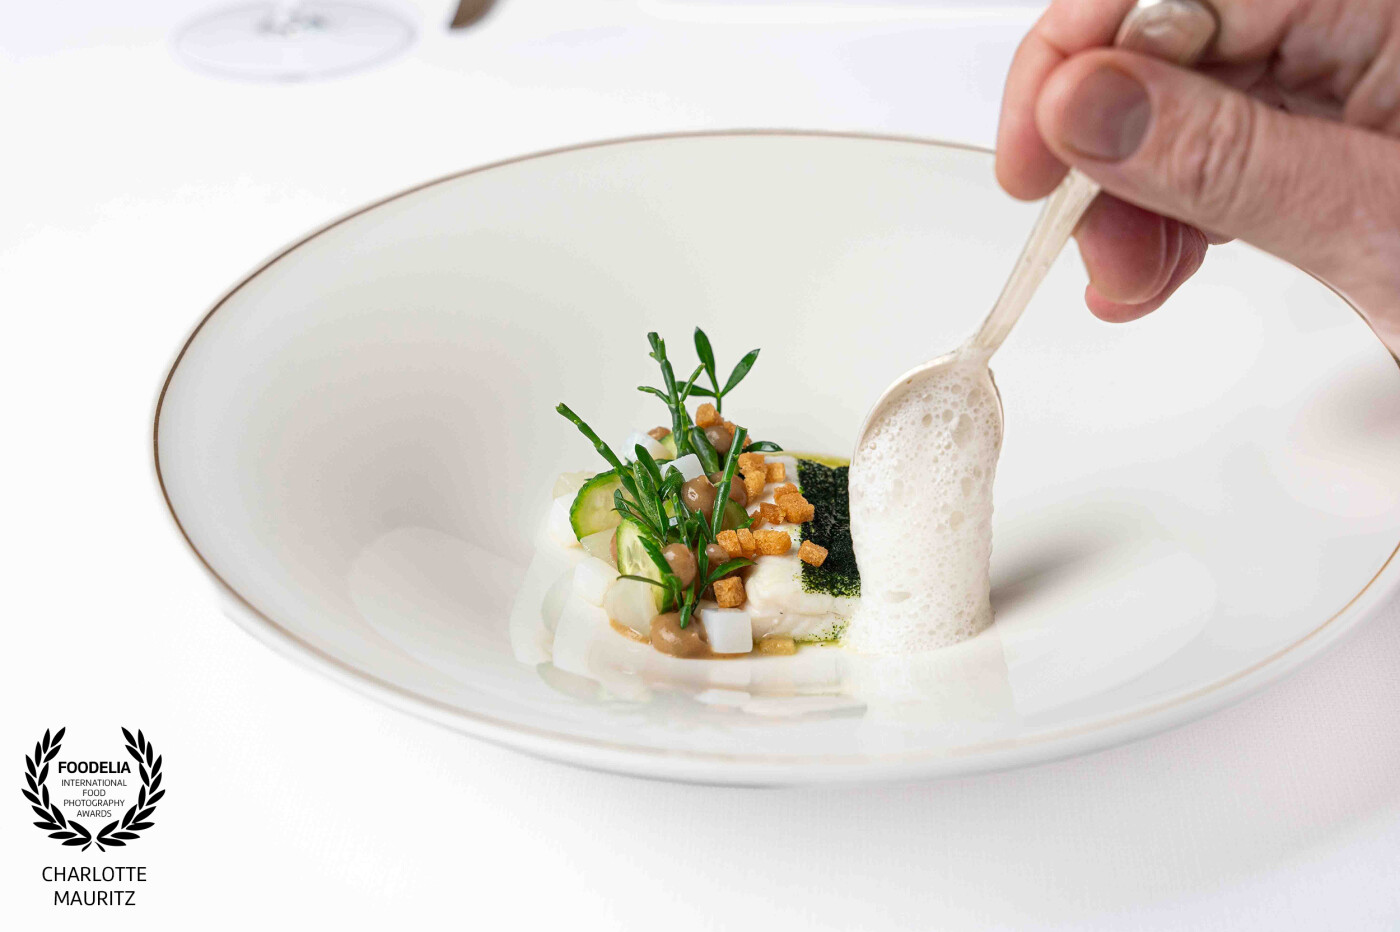 This dish is part of the new wintermenu of chef Dennis van den Beld. The details in this dish makes this an unique dish packed with flavours.